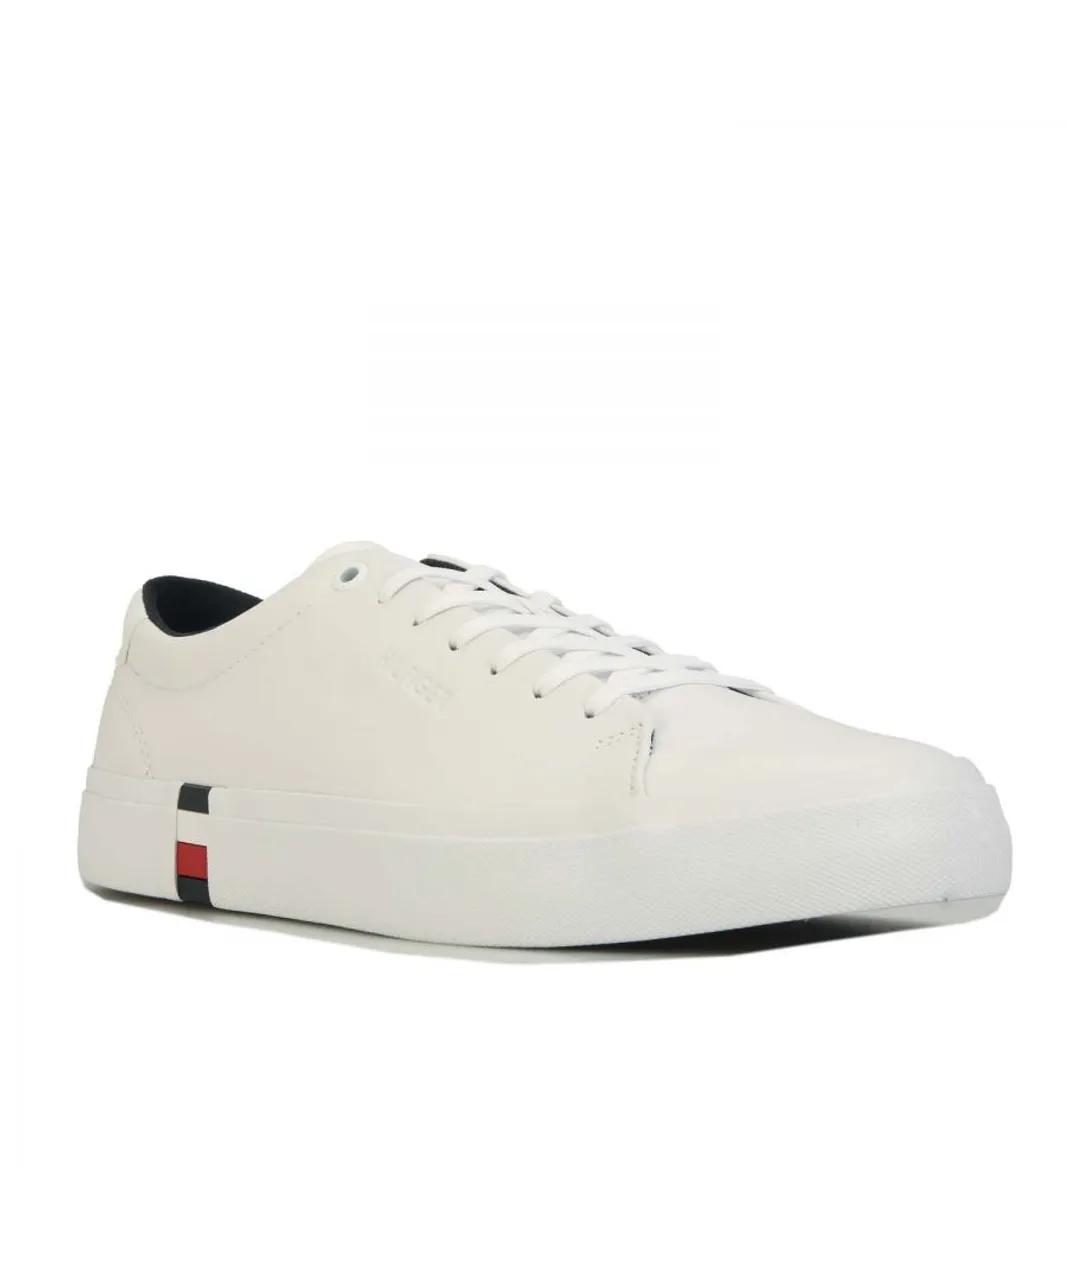 Tommy Hilfiger Mens Modern Vulc Leather Trainers in White